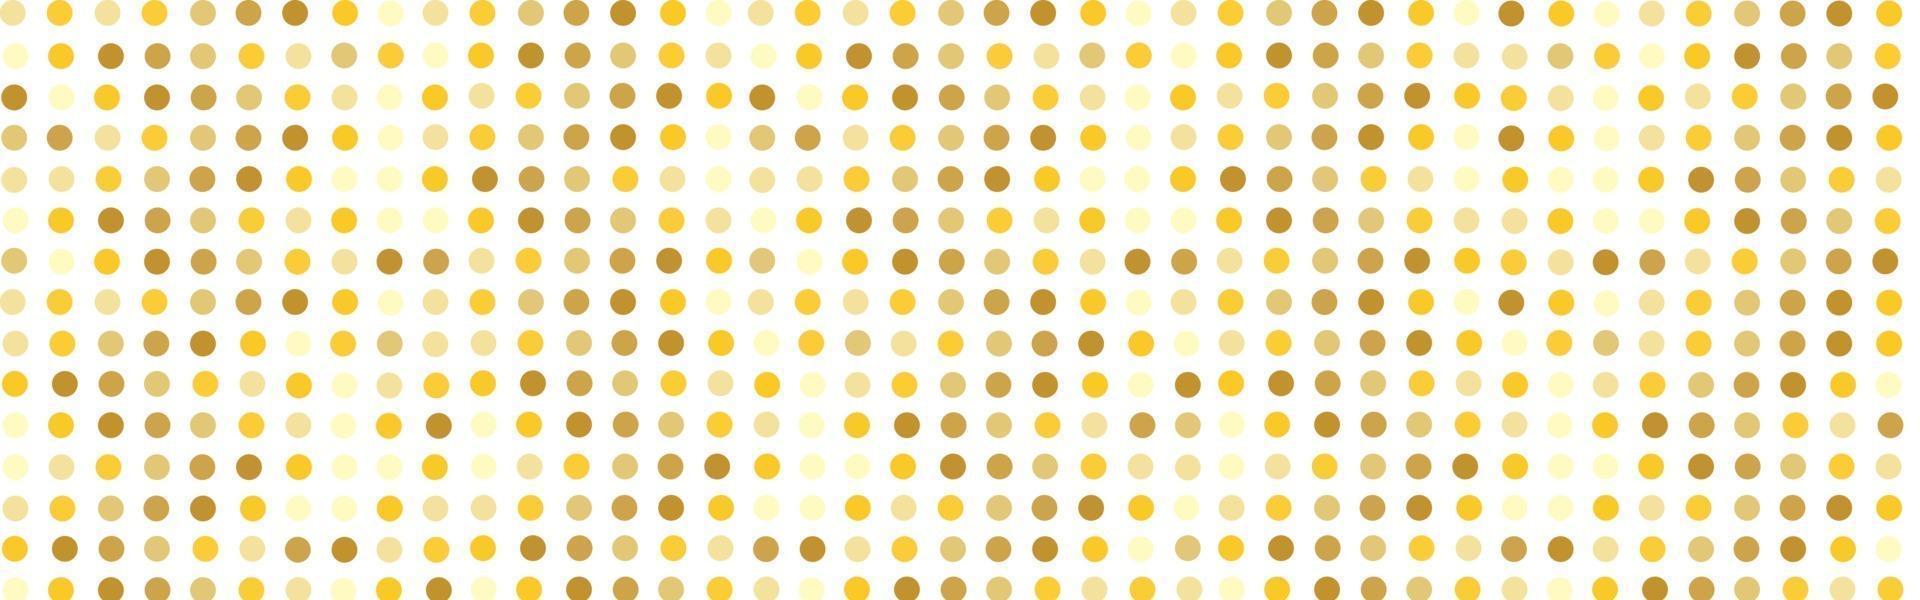 horizontal pattern with yellow dots vector